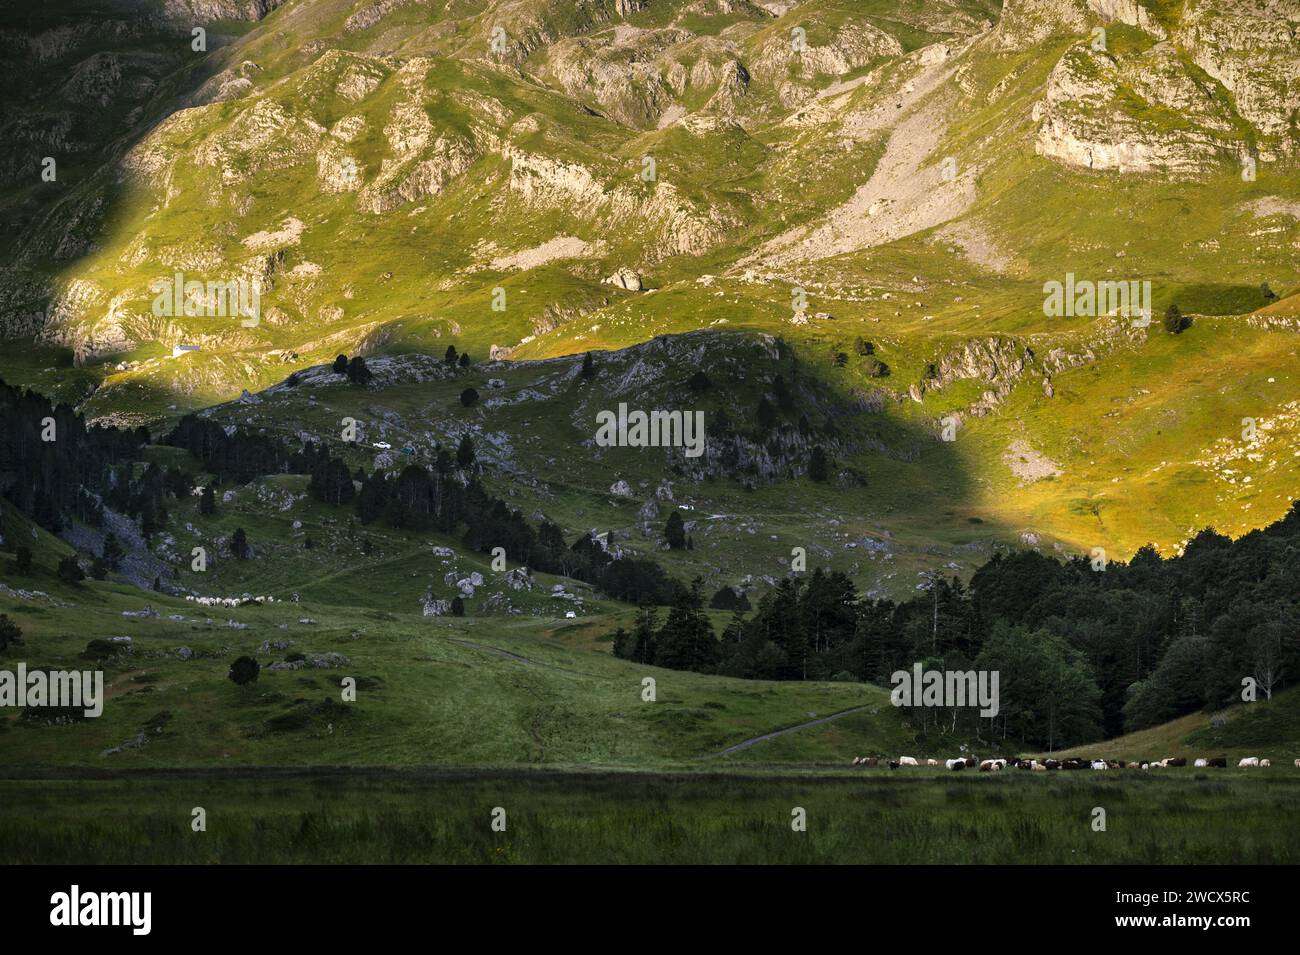 France, Pyrenees Atlantiques, Béarn, Ossau valley, Pyrenees National Park, herds of cows on the Bious-Artigues plateau in the early hours of the morning when the transhumance to the summer pastures begins. Stock Photo